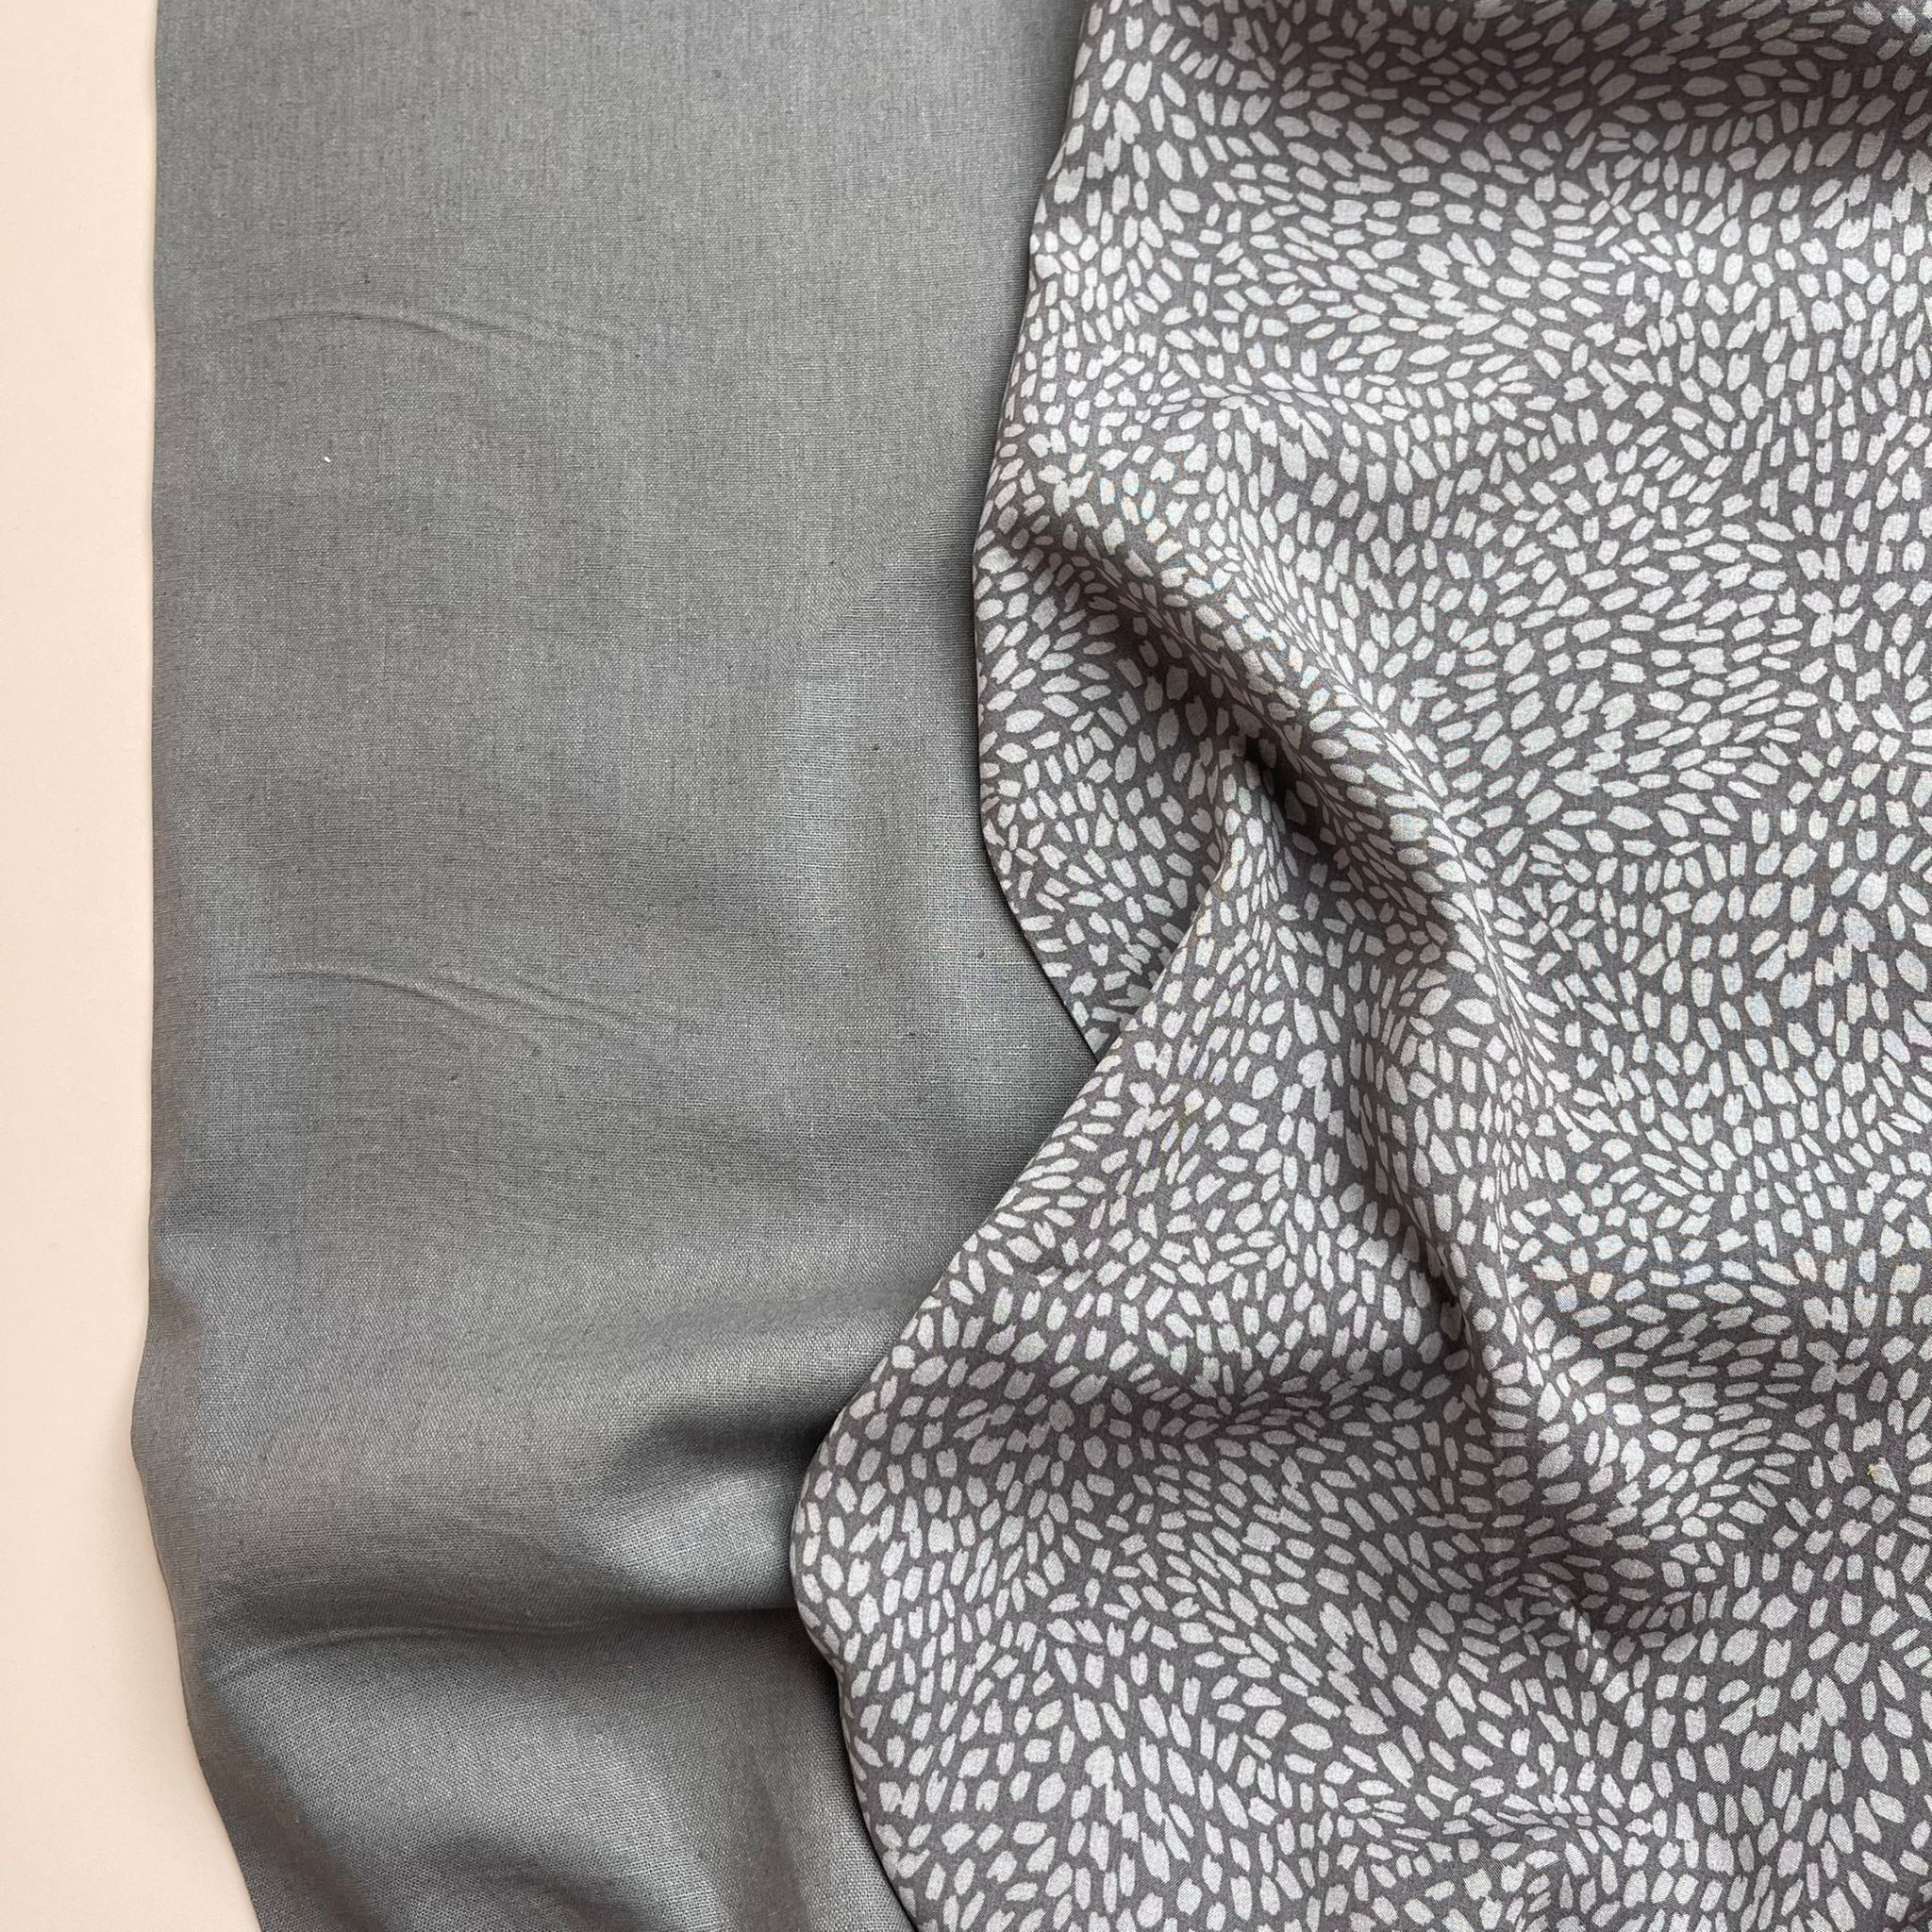 REMNANT 0.3 Metre - Dense Shapes in Taupe Viscose / Rayon Fabric